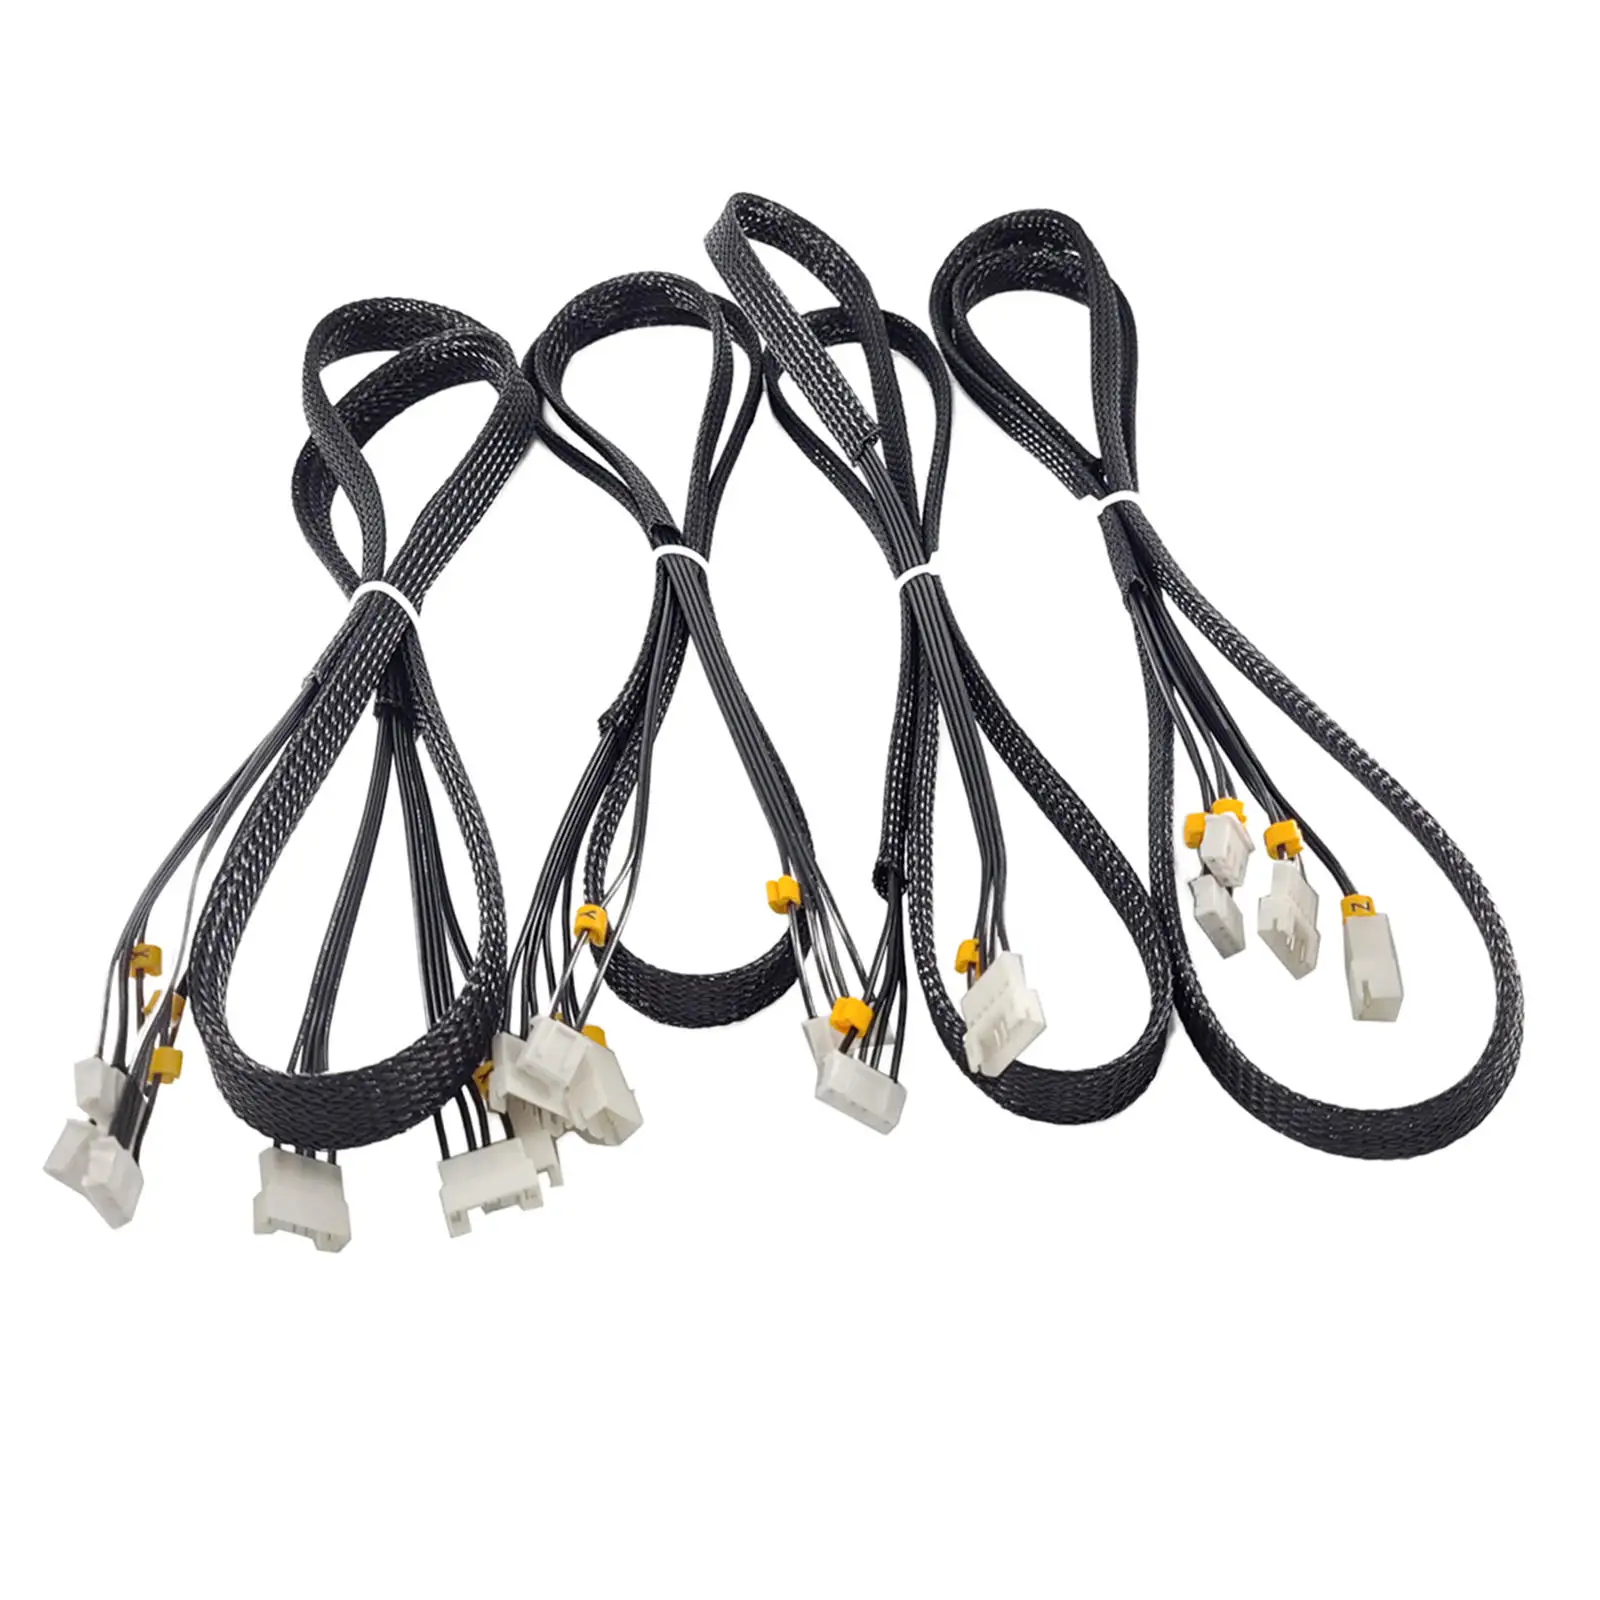 XYZZ  Stepper Motor Limit Switch Cables for Ender-3 Ender-5 CR-10 /S4/S5